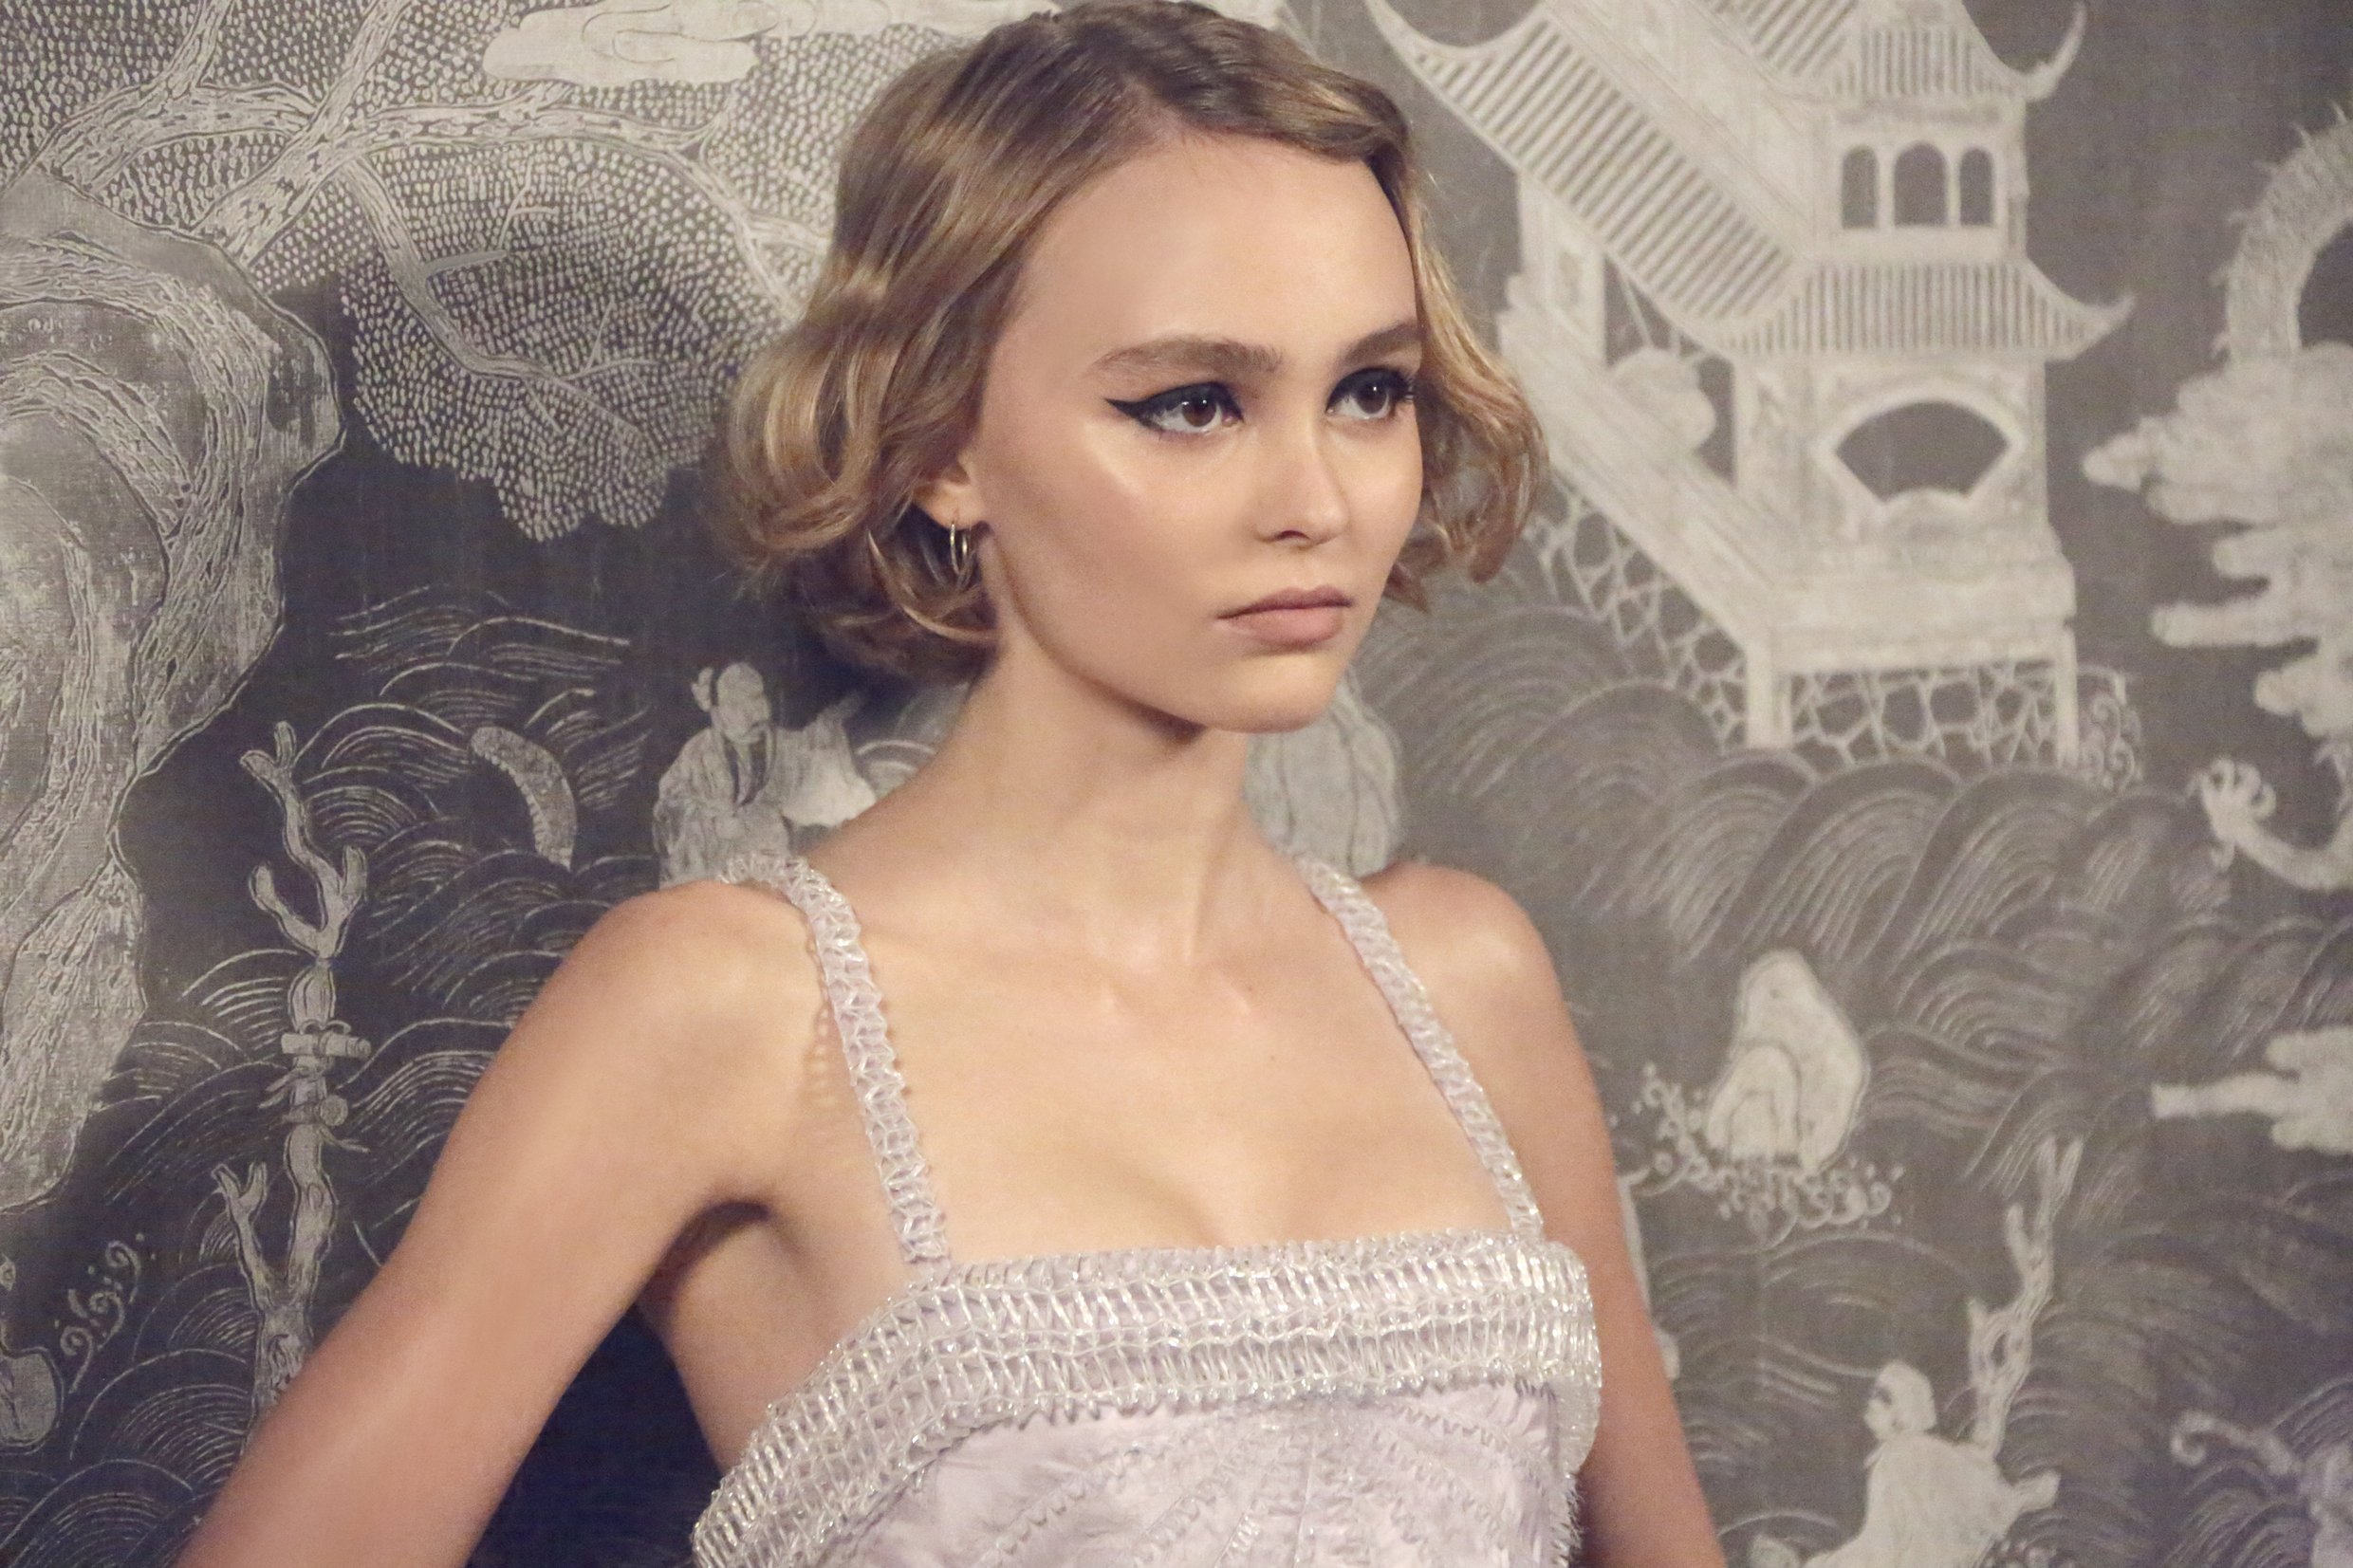 LILY-ROSE DEPP IS THE NEW FACE OF CHANEL PARFUM N°5 L’EAU